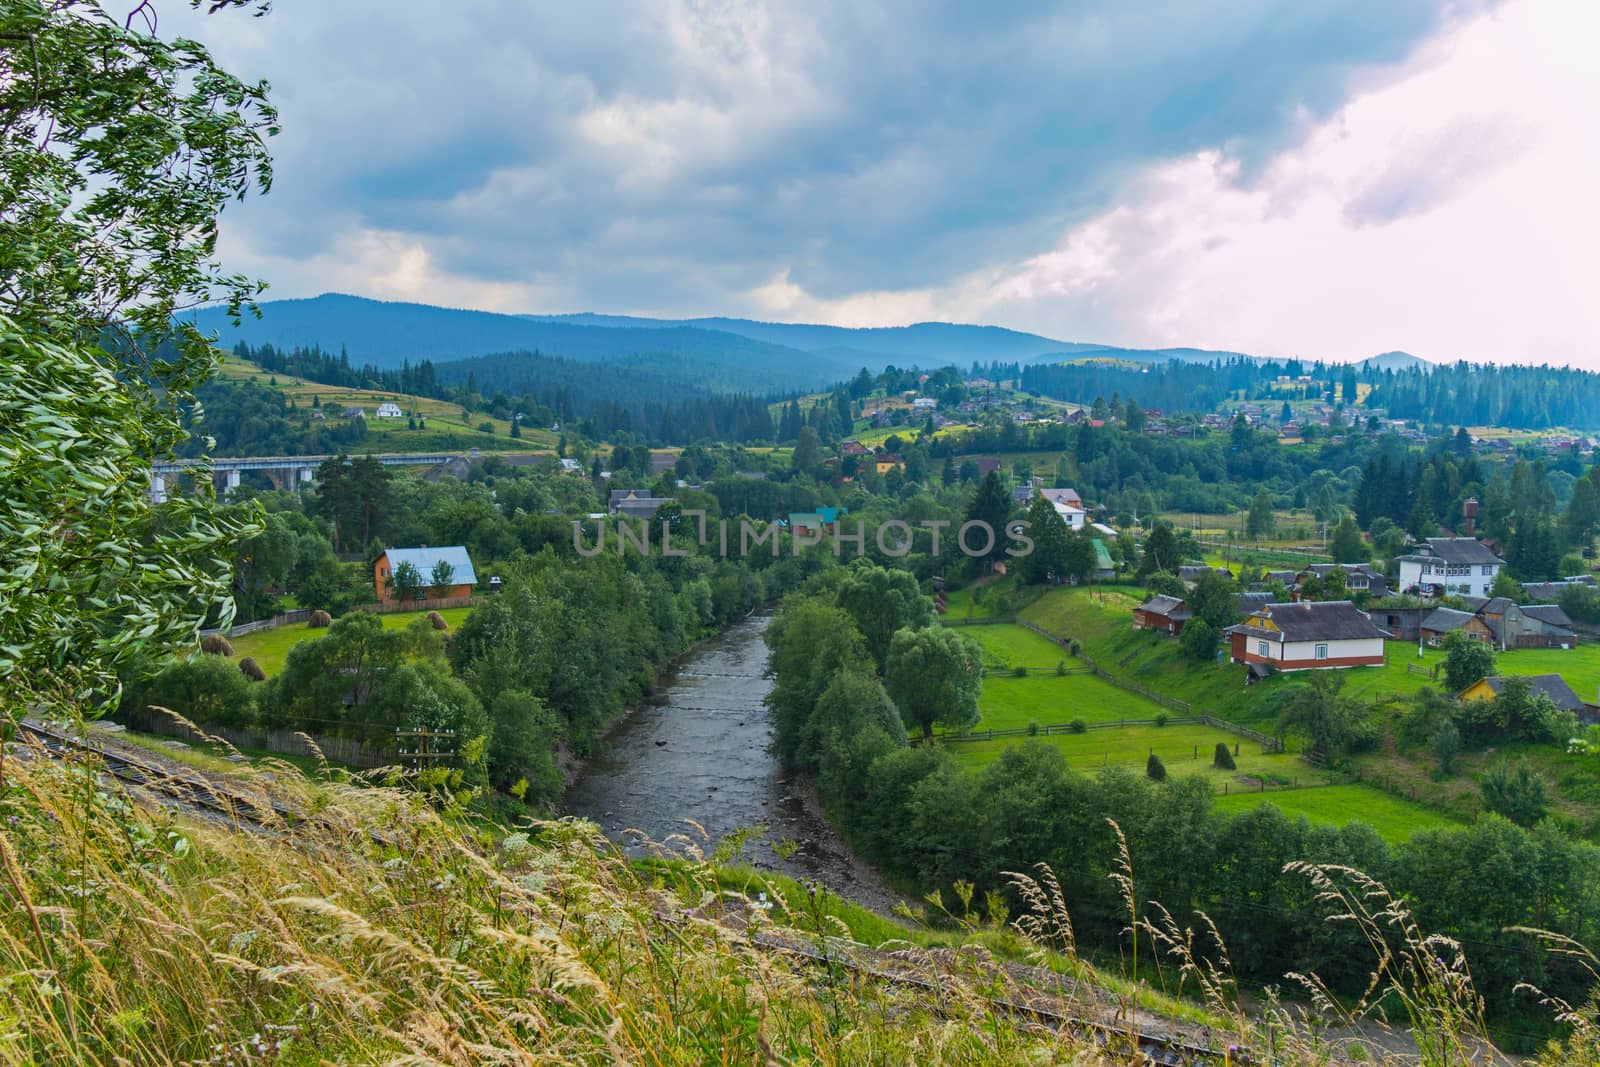 an exciting landscape on a mountain river with willows along the shores and a town on both sides of the stream against the background of the distant blue mountains by Adamchuk